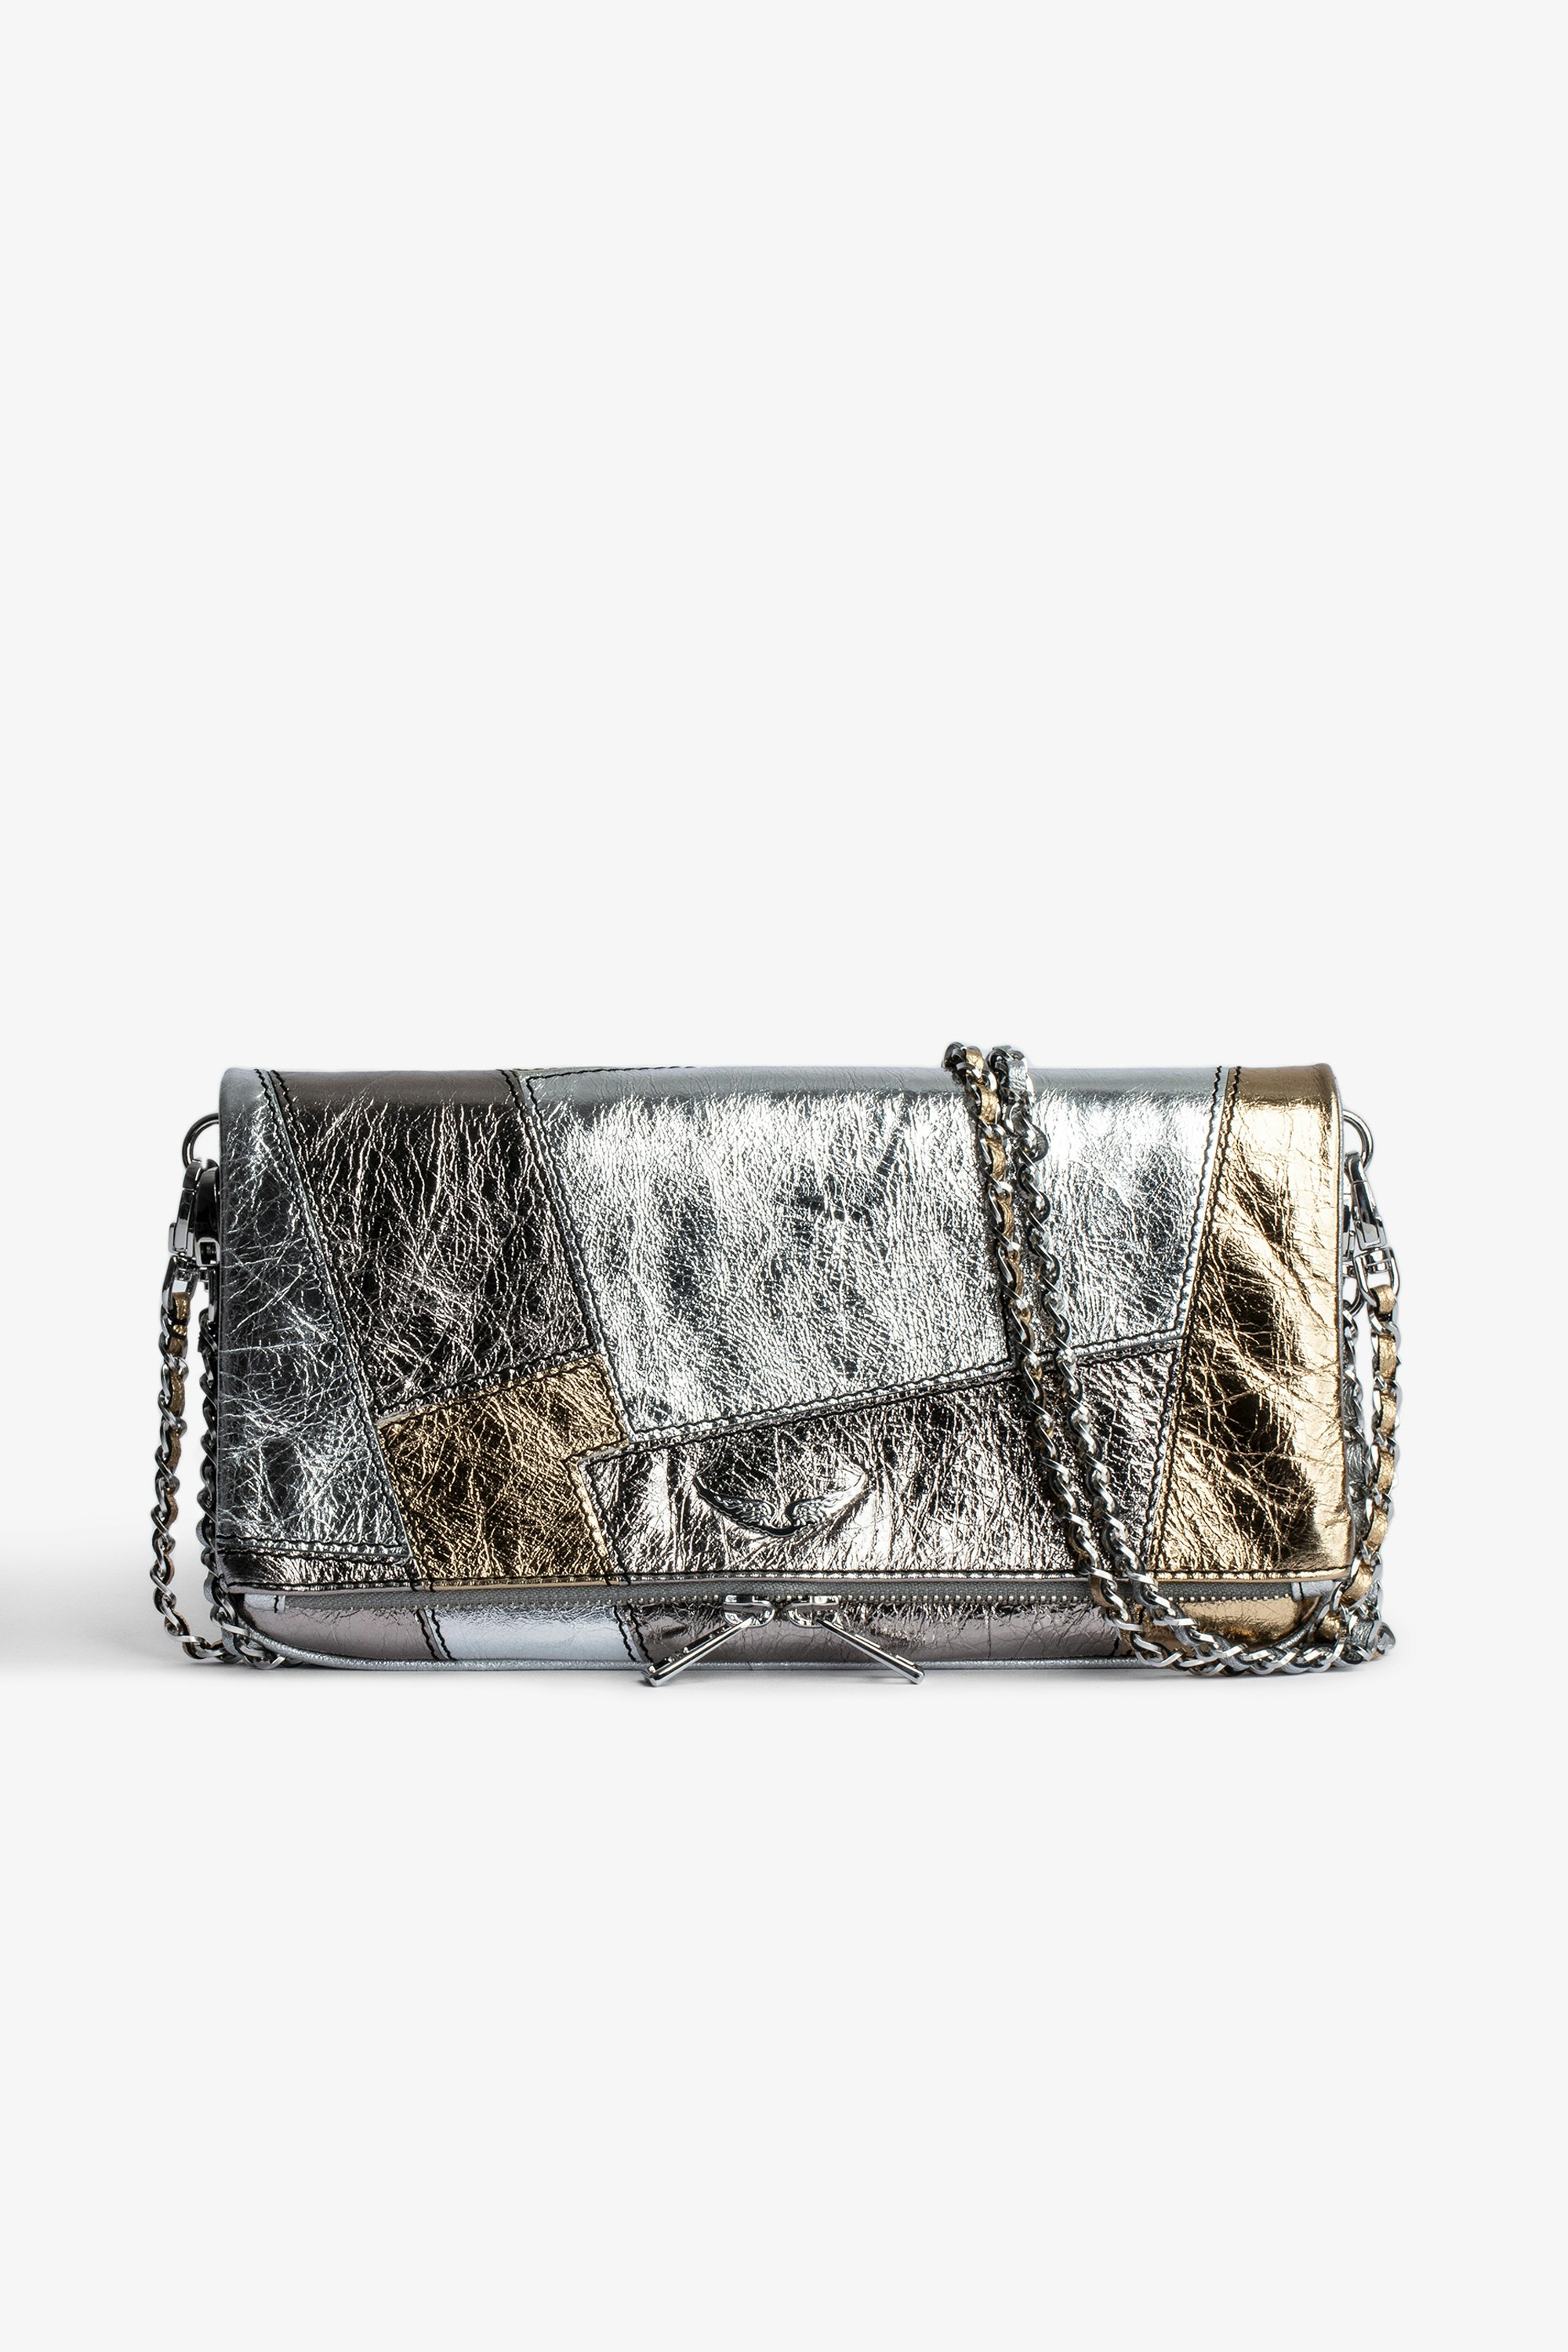 Rock Vintage Metal Patchwork Clutch Women’s clutch bag in silver and gold metallic leather patchwork